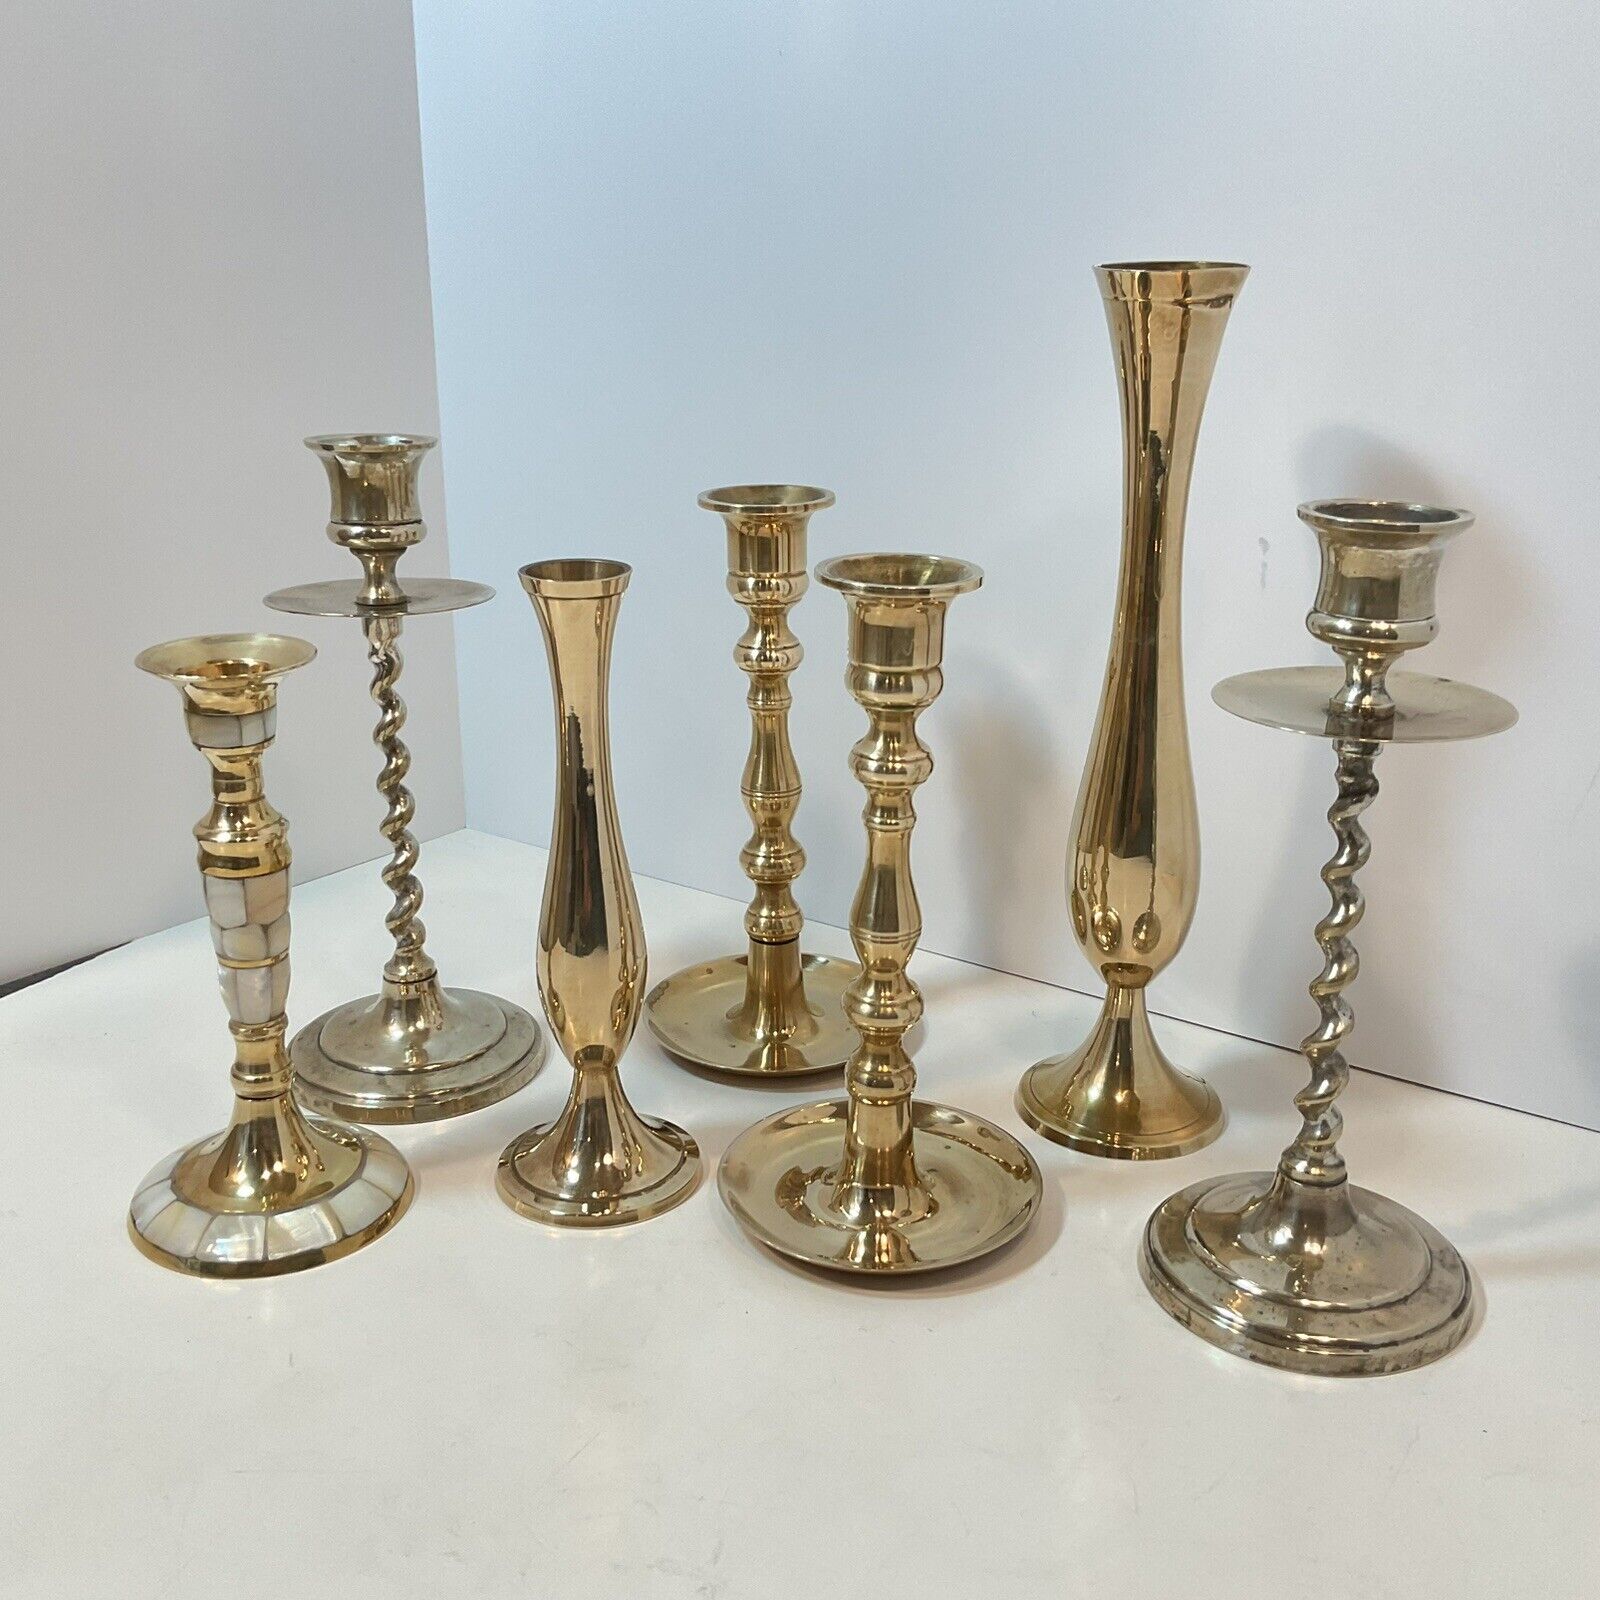 Vintage 6” To 9” Brass Polished Candlestick Candle Holders Mixed SET OF 7.